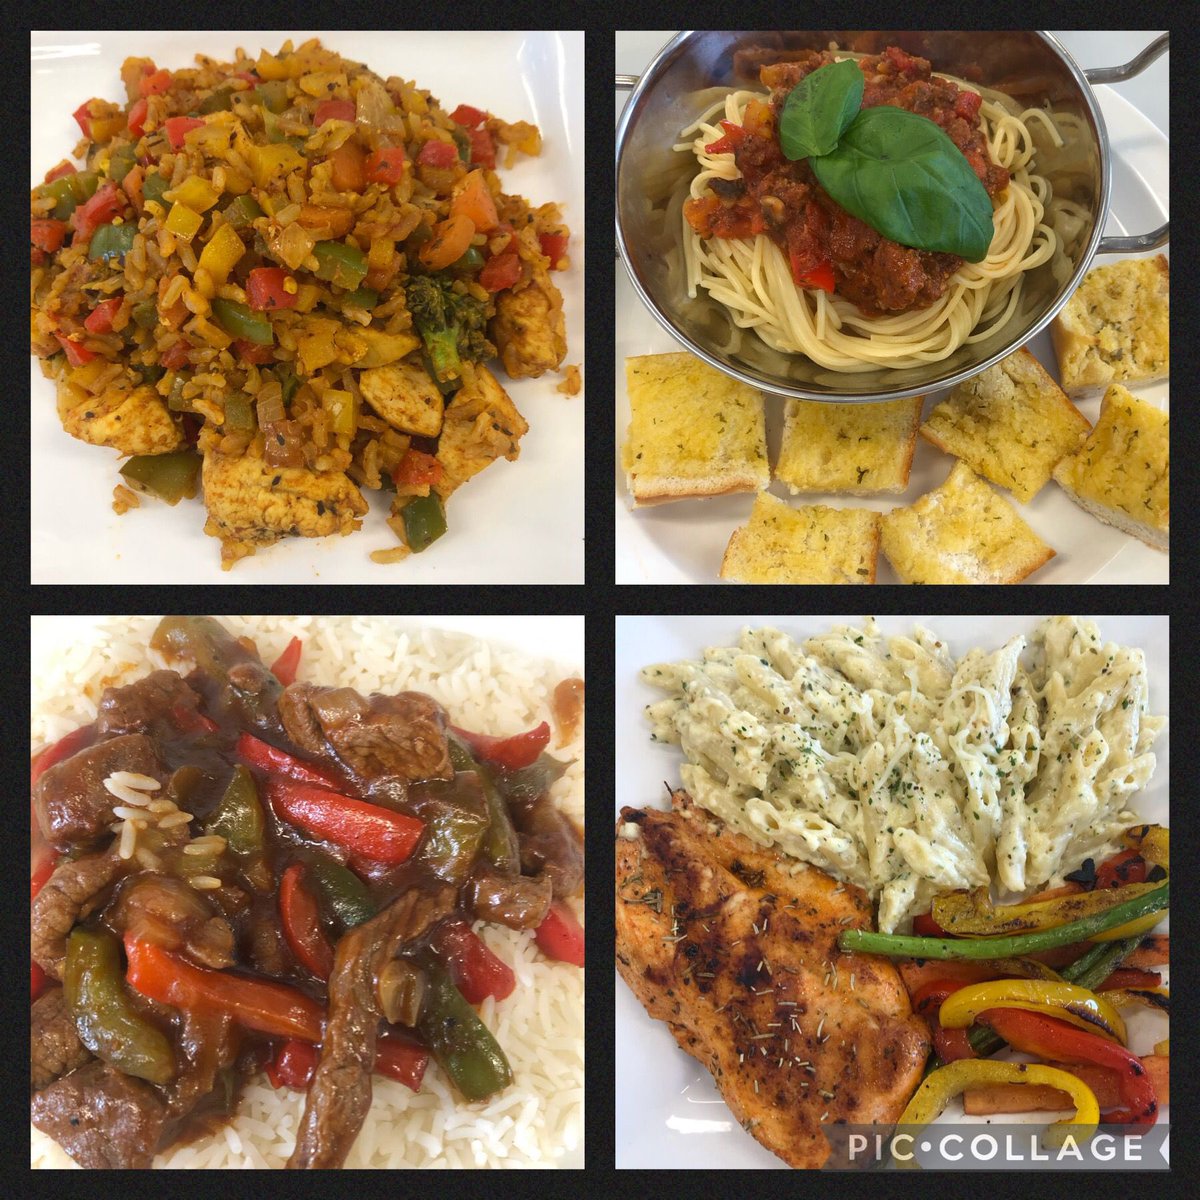 Fantastic effort from 2nd Year students who prepared, cooked and served a wide variety of dishes for their individual summer practical exam. A great display of skills. Well done to all students!🍕🍝🍛 @mungretcc